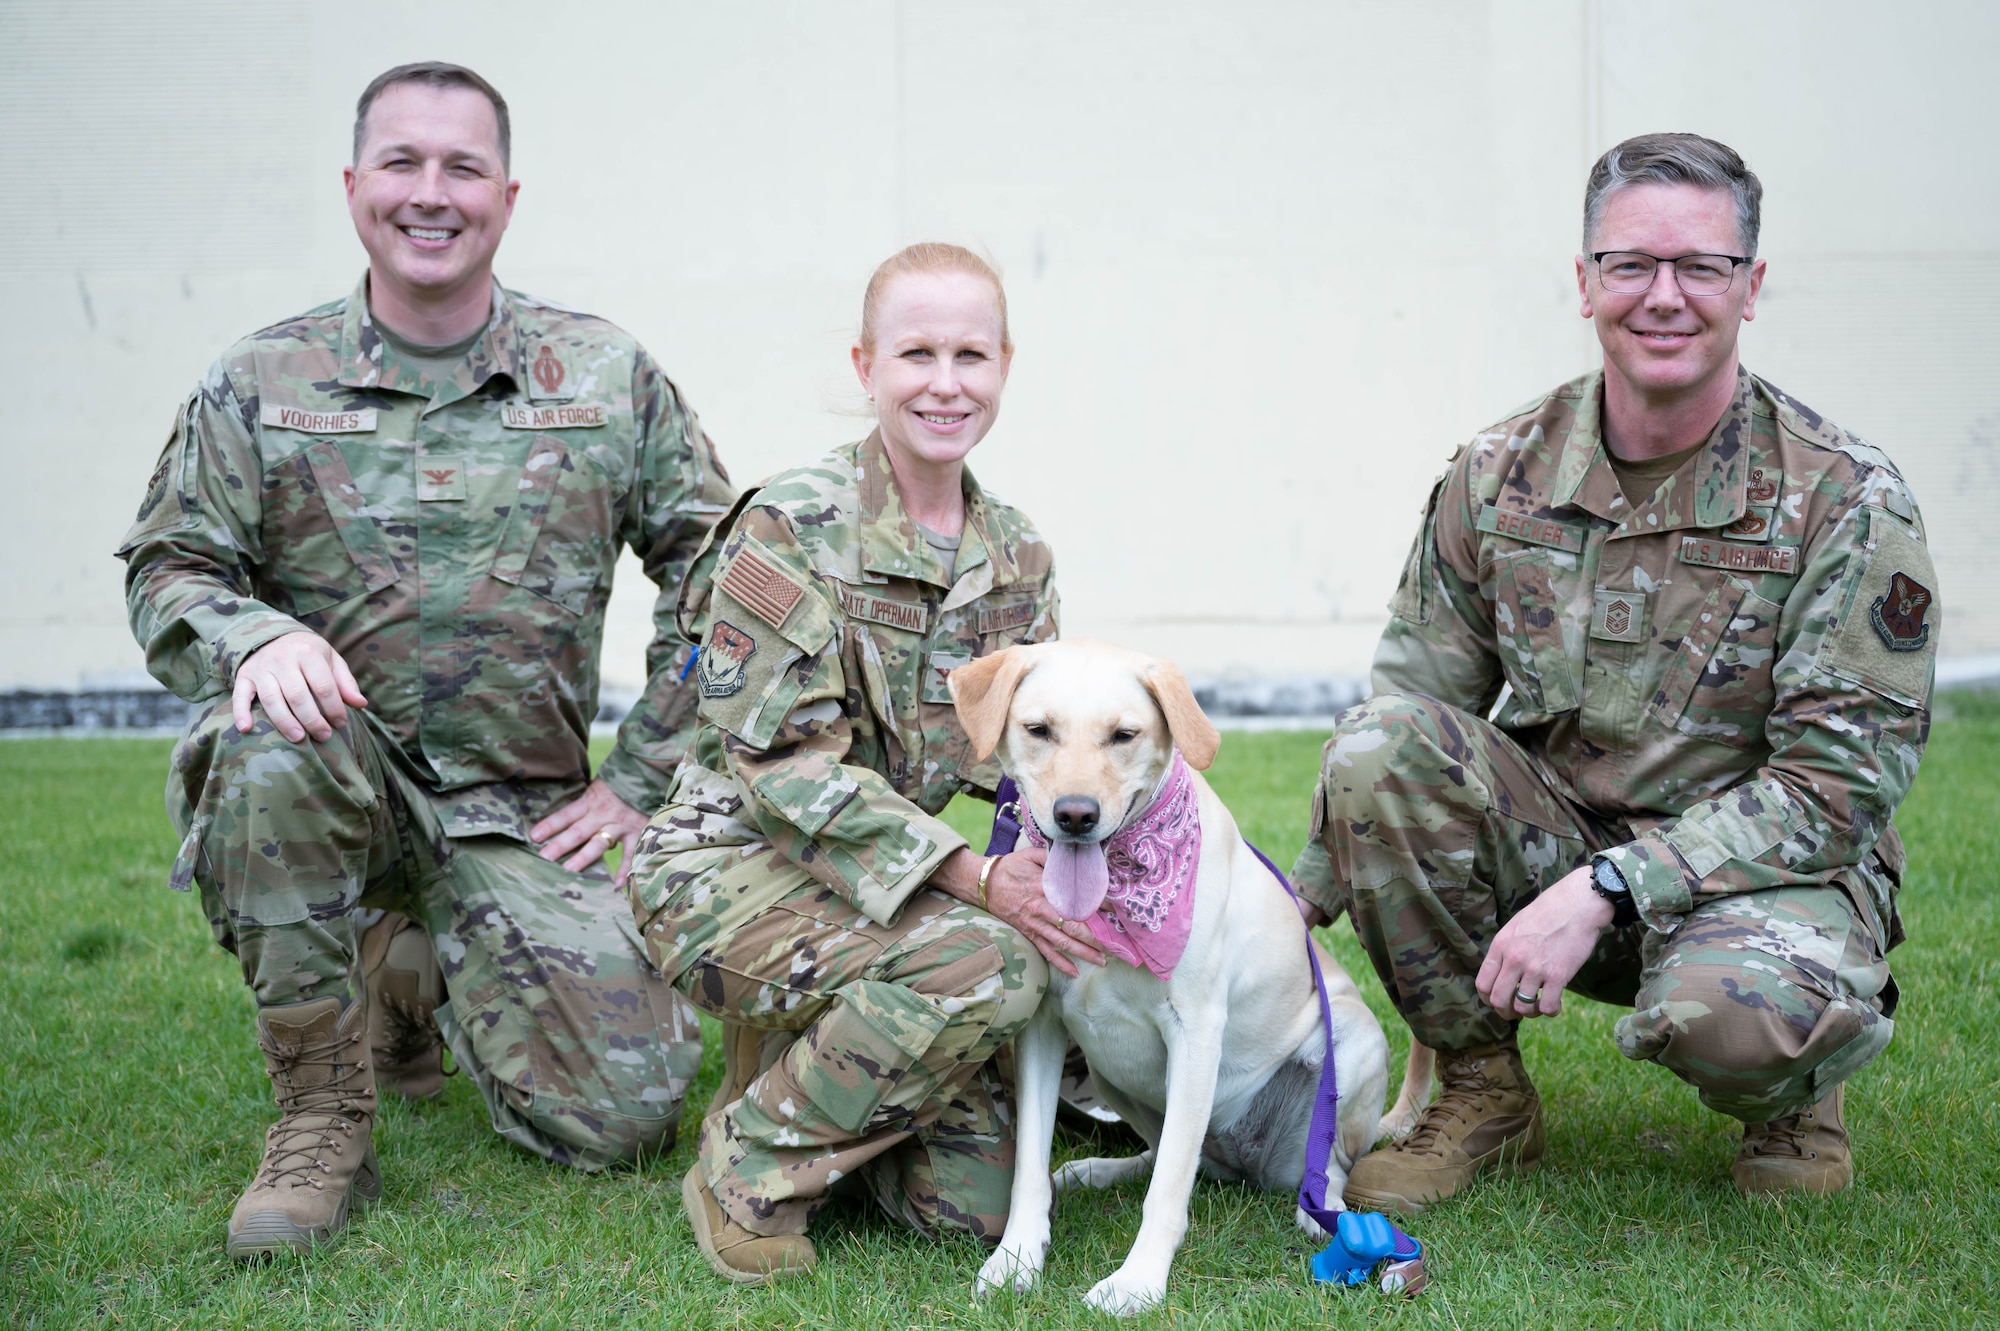 Col. Anita Feugate Opperman, center, 341st Missile Wing commander, Col. Daniel Voorhies, left, 341st MW vice commander, Chief Master Sgt. Michael Becker, right, 341st MW command chief, and Aspen, front, 341st MW top dog, pose for a photo Aug. 10, 2021, at Malmstrom Air Force Base, Mont.